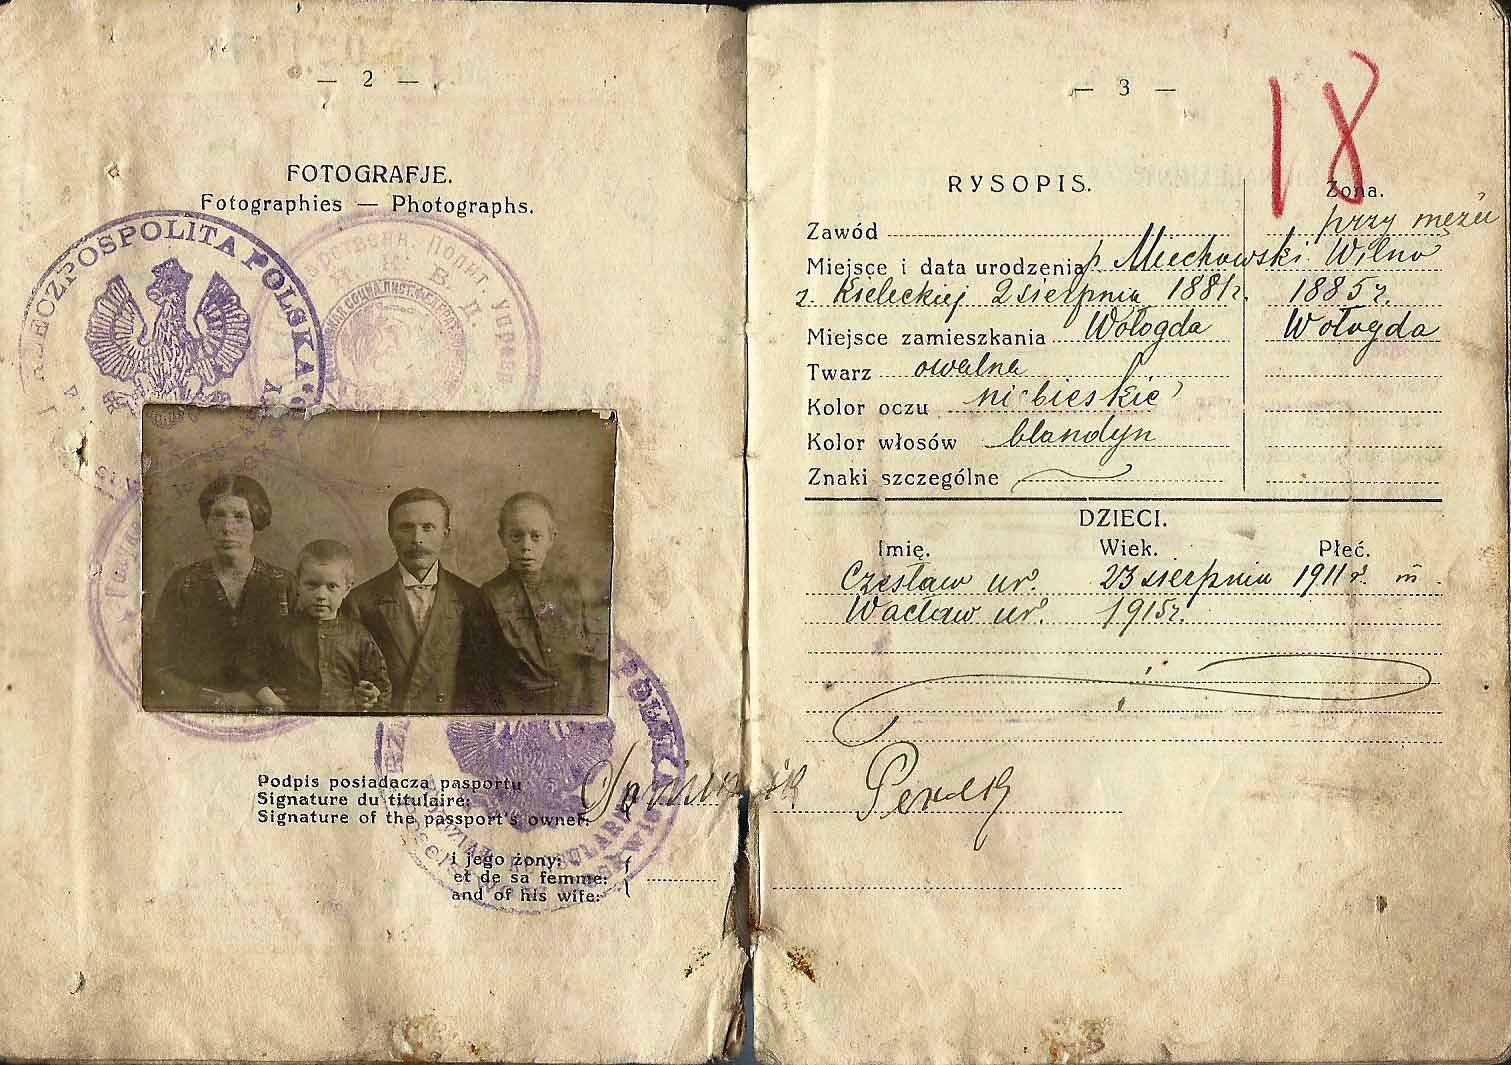 Polish passport showing the head of the family with his wife and two children